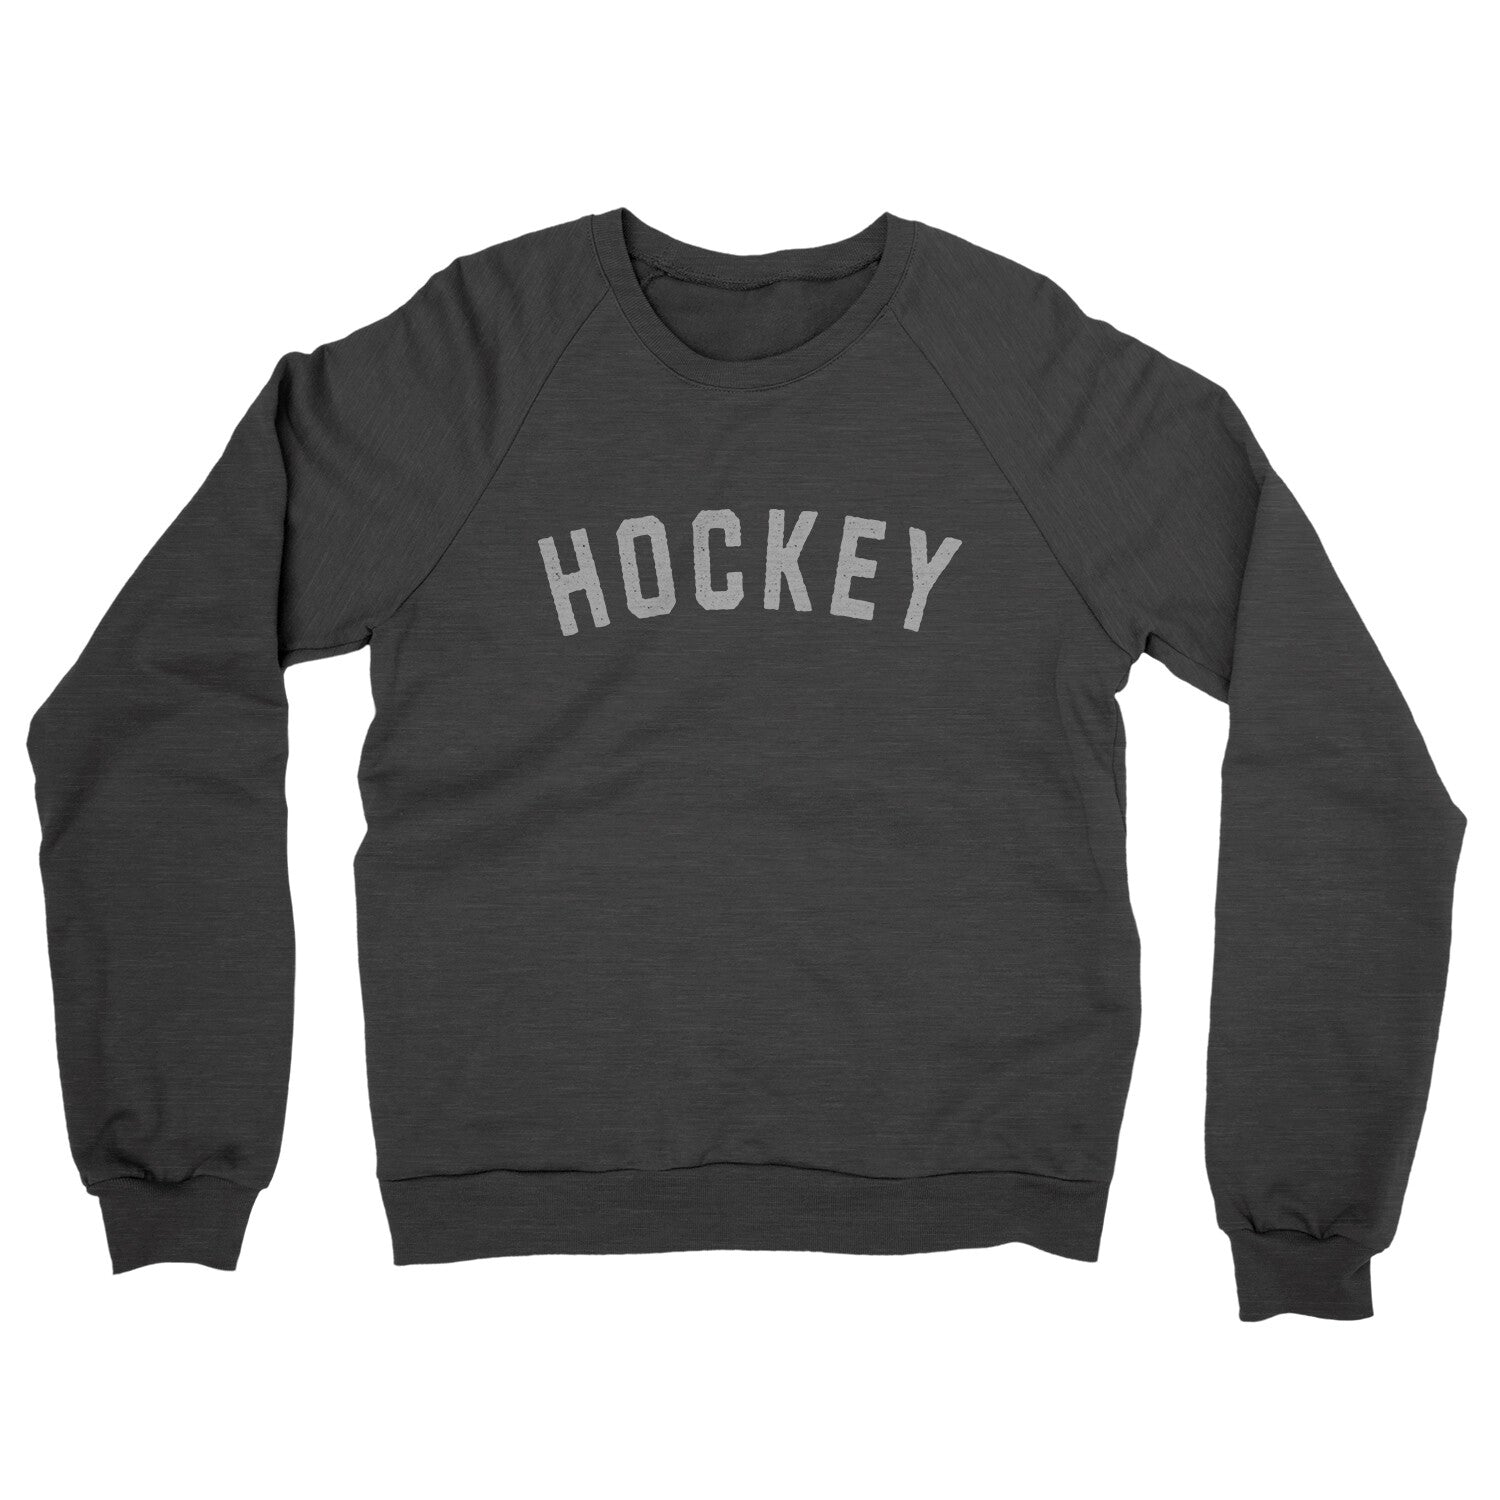 Hockey in Charcoal Heather Color